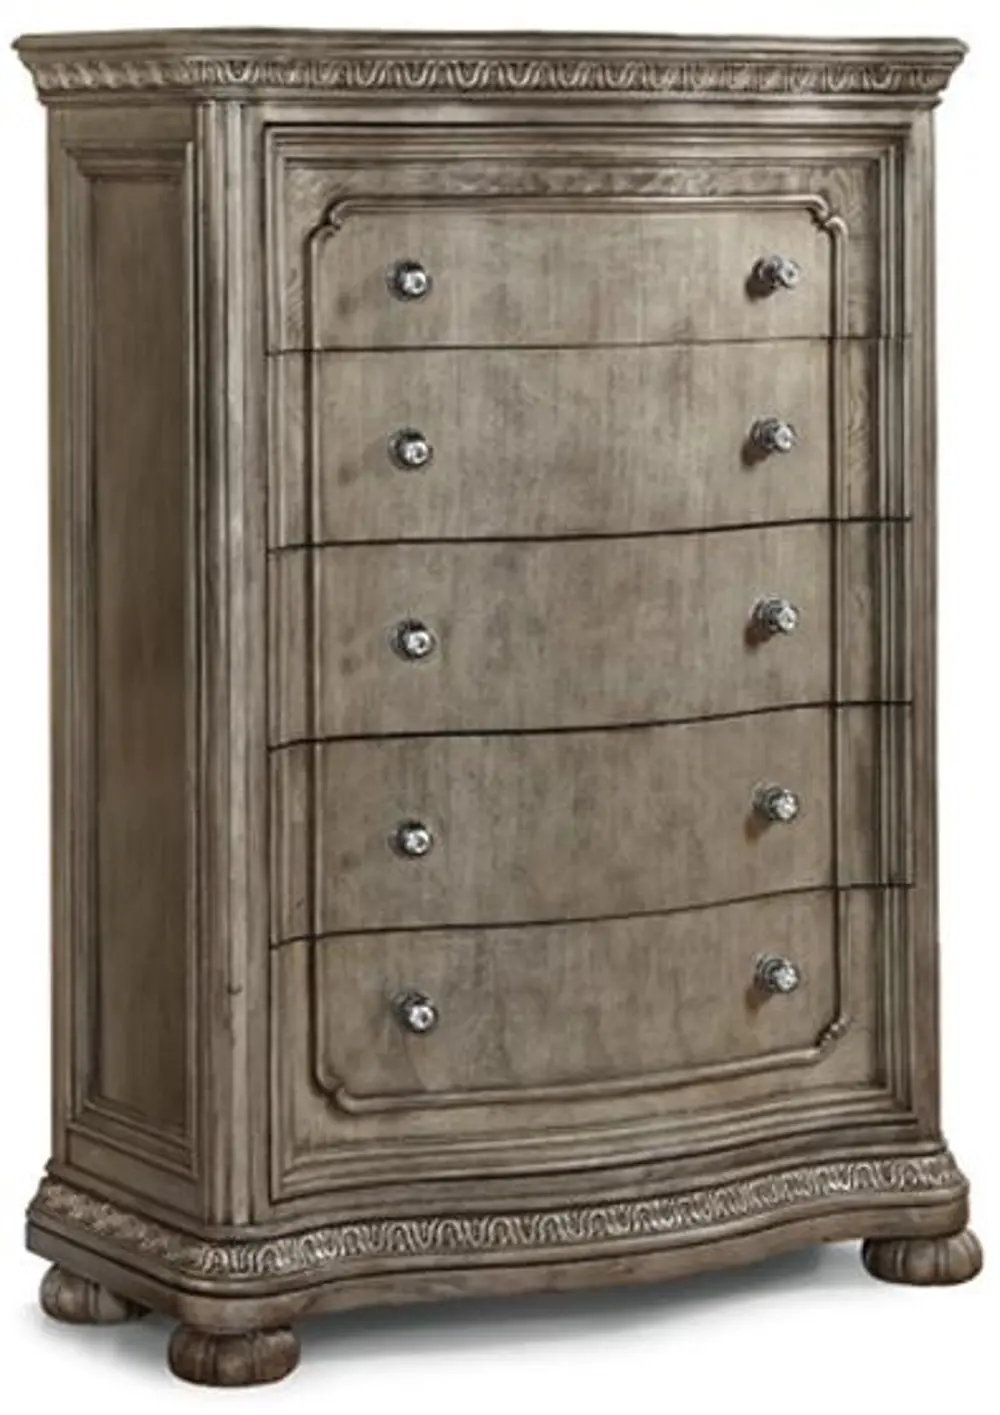 Antique Metallic Traditional Chest of Drawers - San Cristobal-1